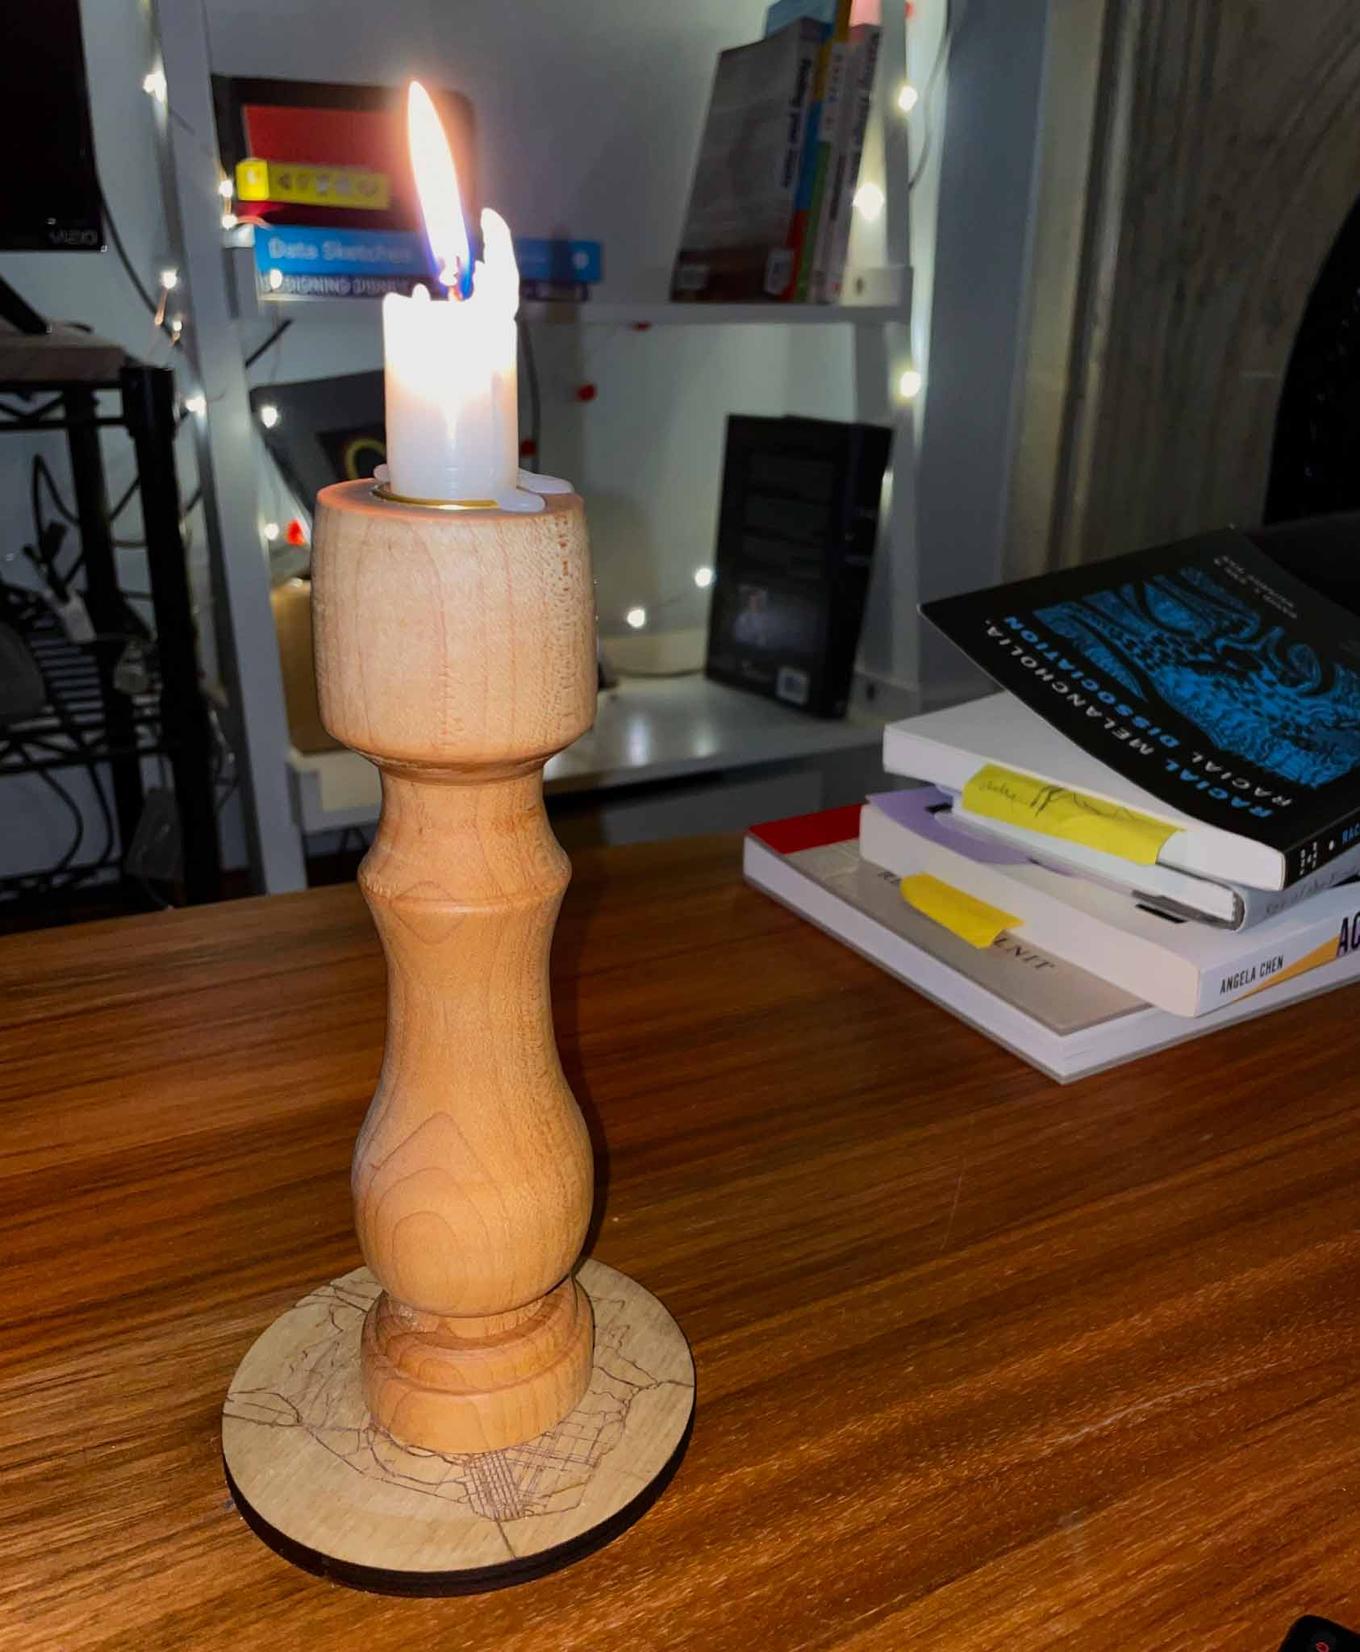 Candlestick in use